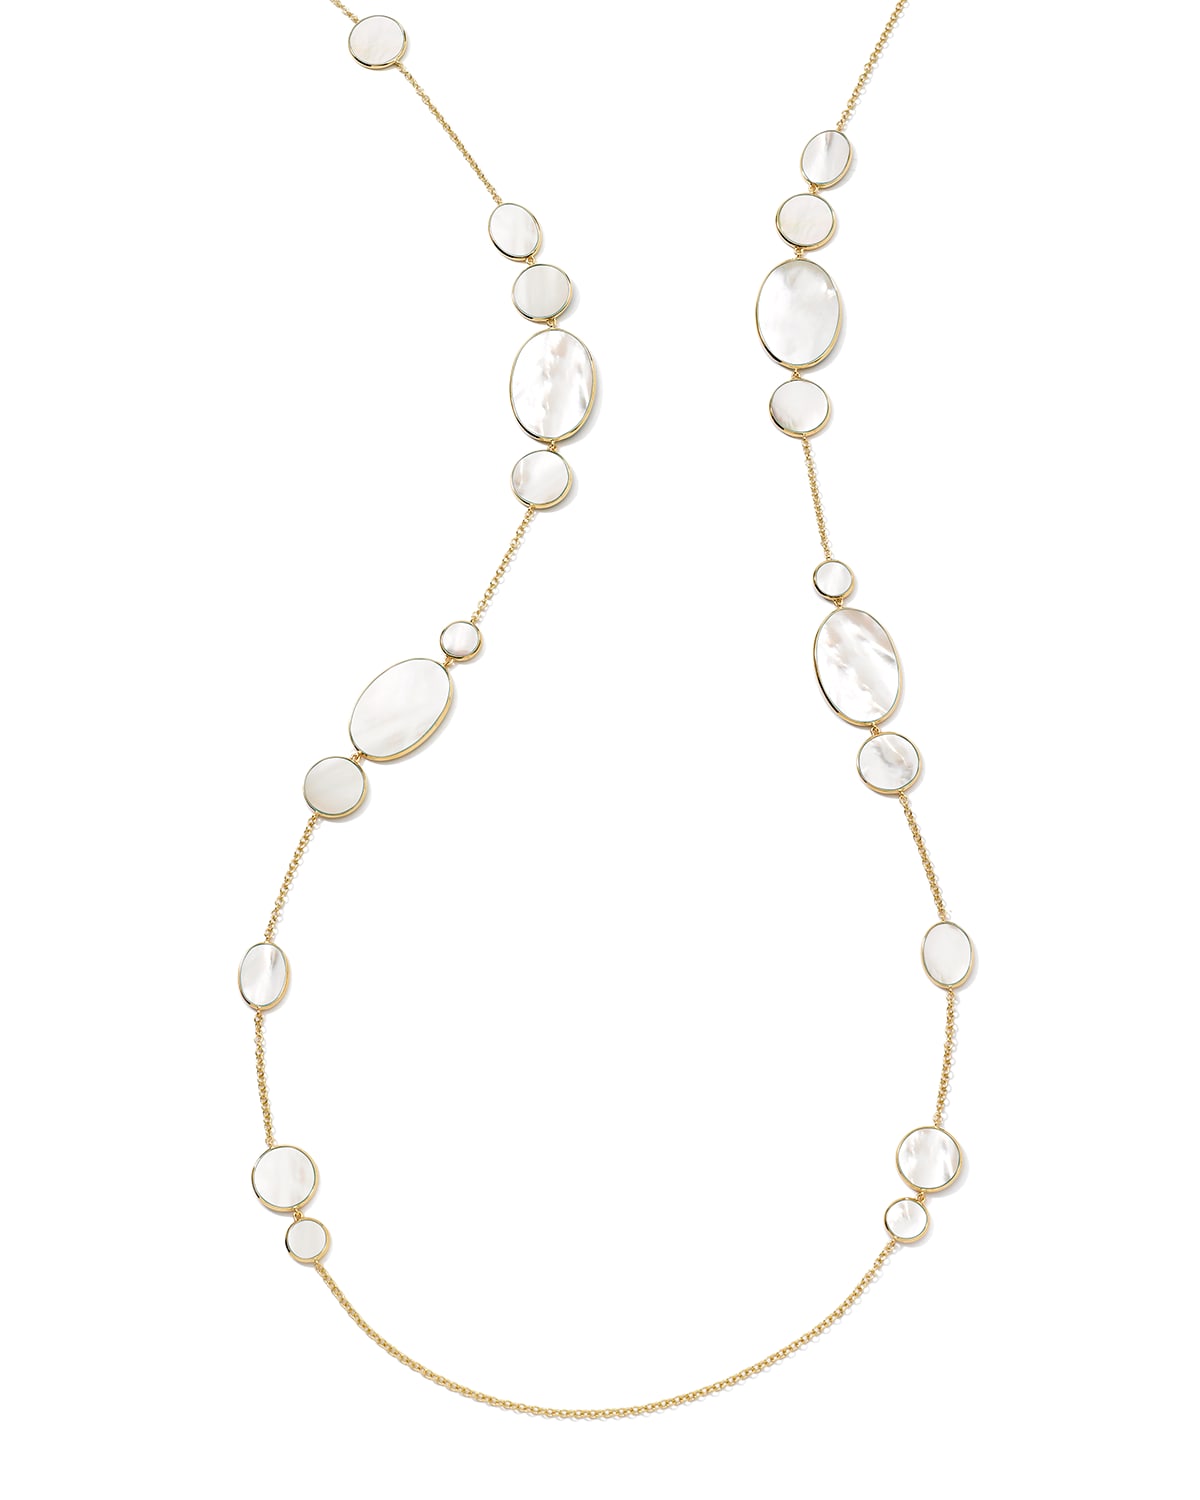 Ippolita Rock Candy Mother of Pearl Teardrop Necklace